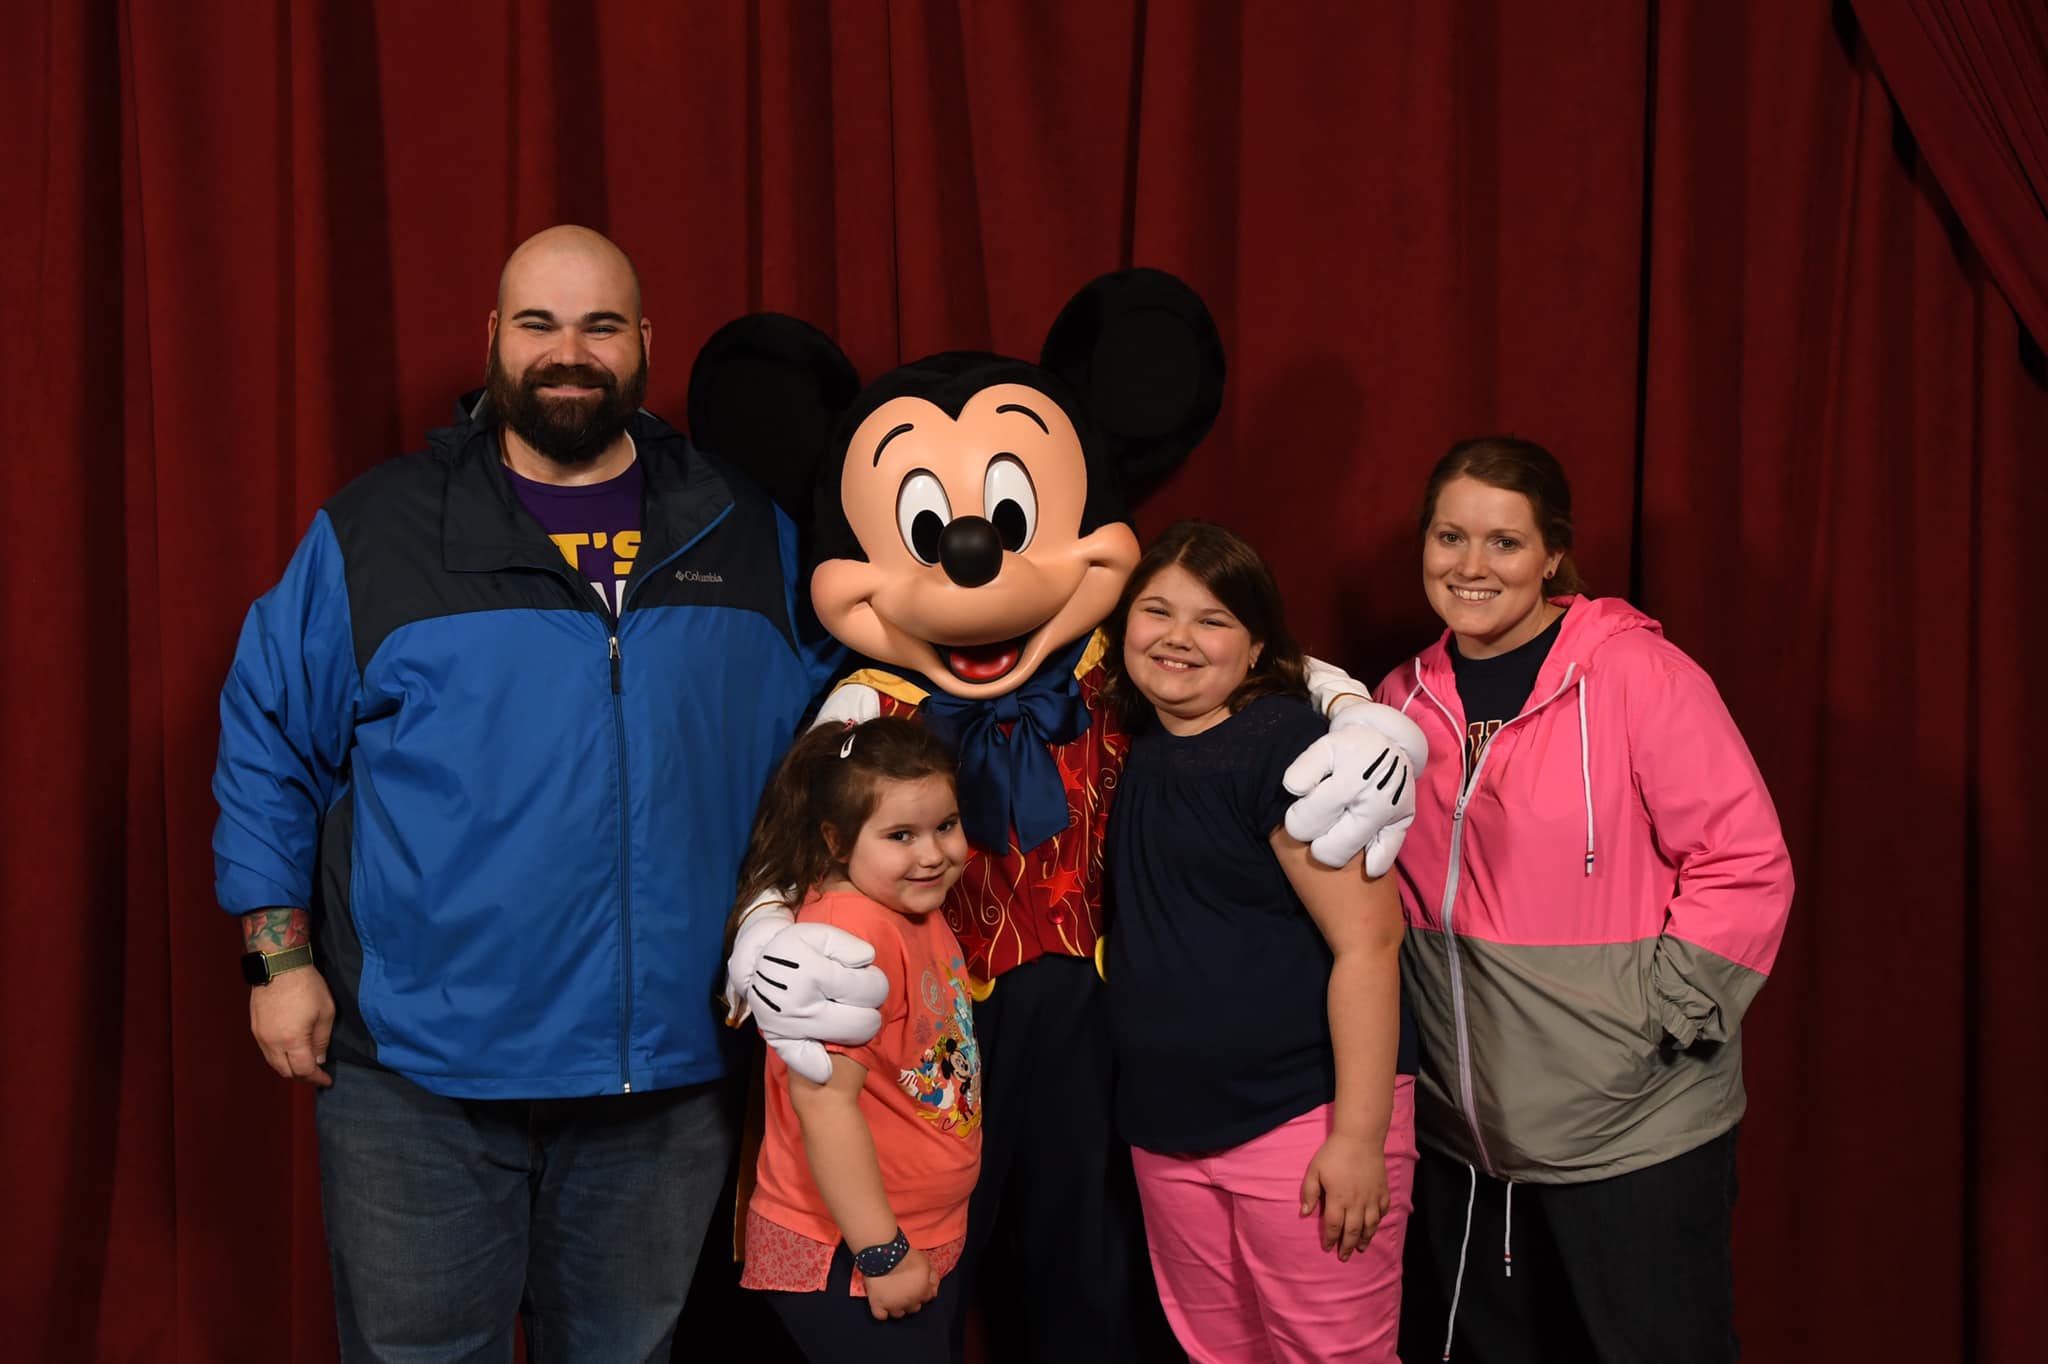 Family photo - Man, woman, two young daughters standing with Mickey Mouse